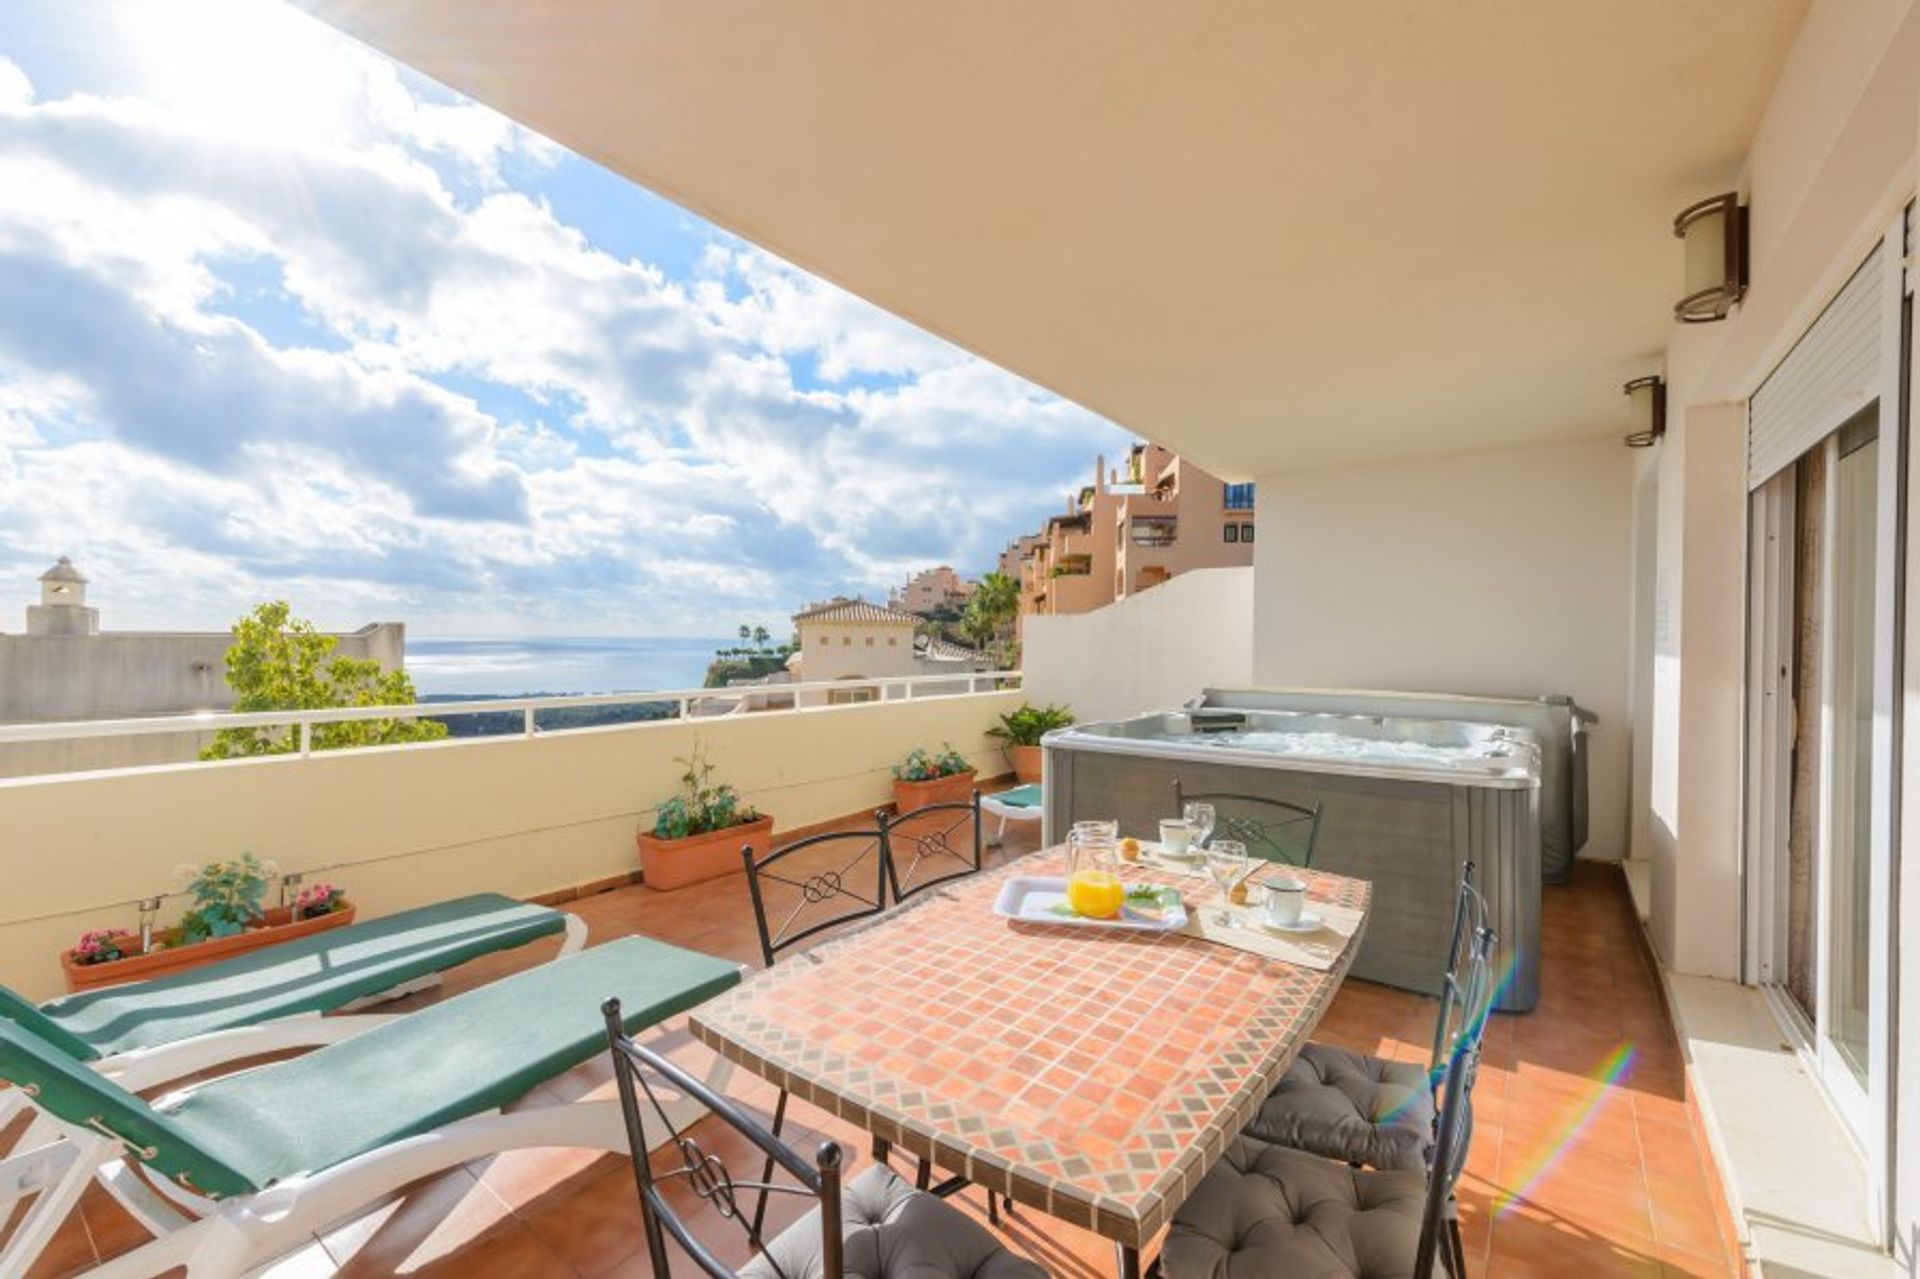 Stay in one of our apartment rentals overlooking the beach and Mediterranean